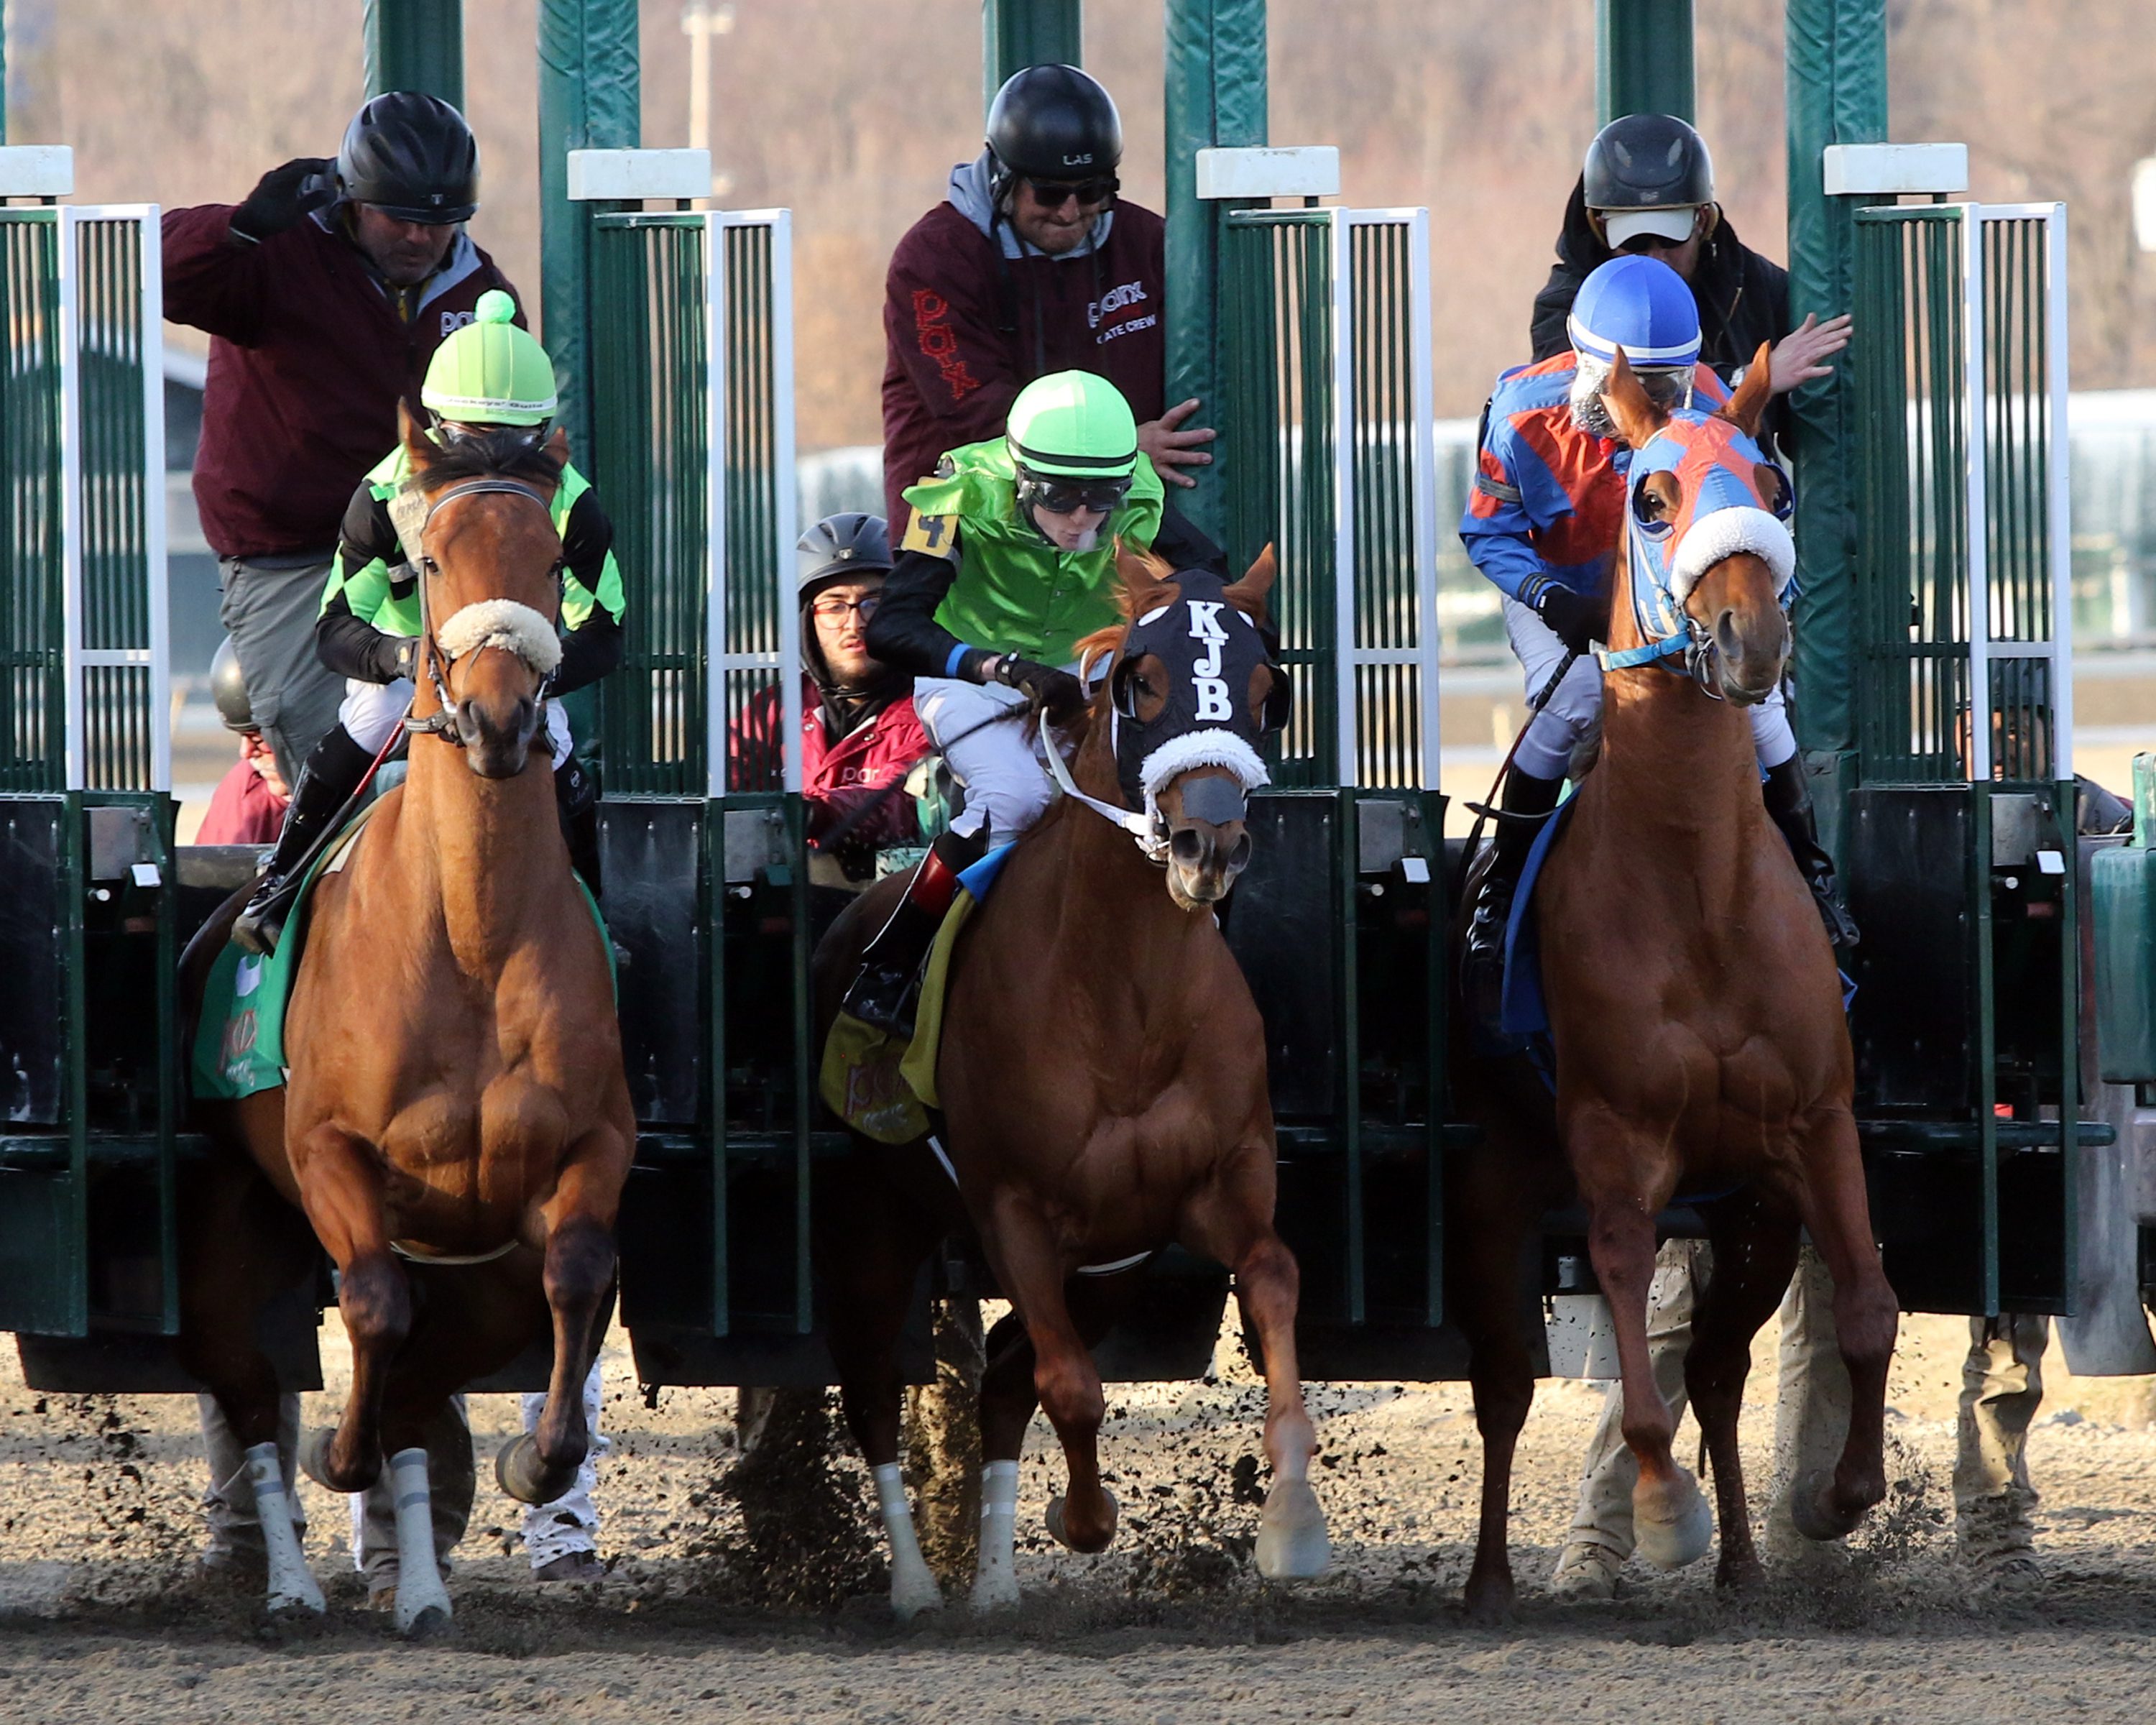 The start of The City of Brotherly Love at Parx on March 8, 2022. Photo By: Chad B. Harmon